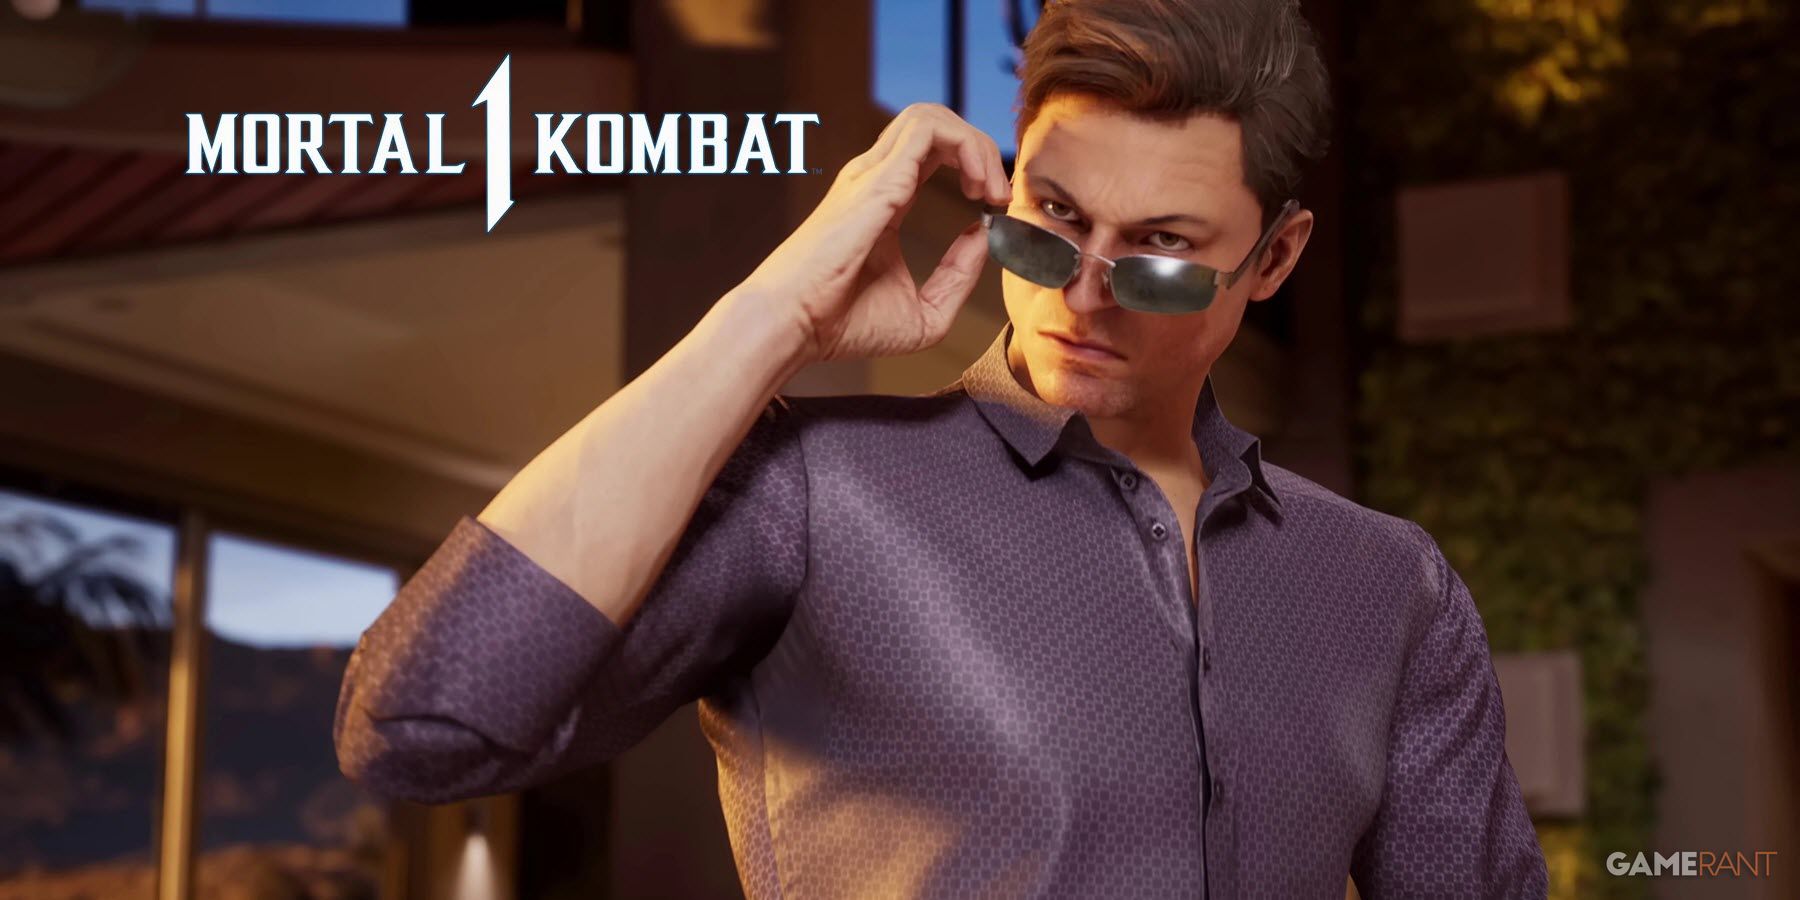 Johnny Cage has the best fatality in Mortal Kombat 11 so far